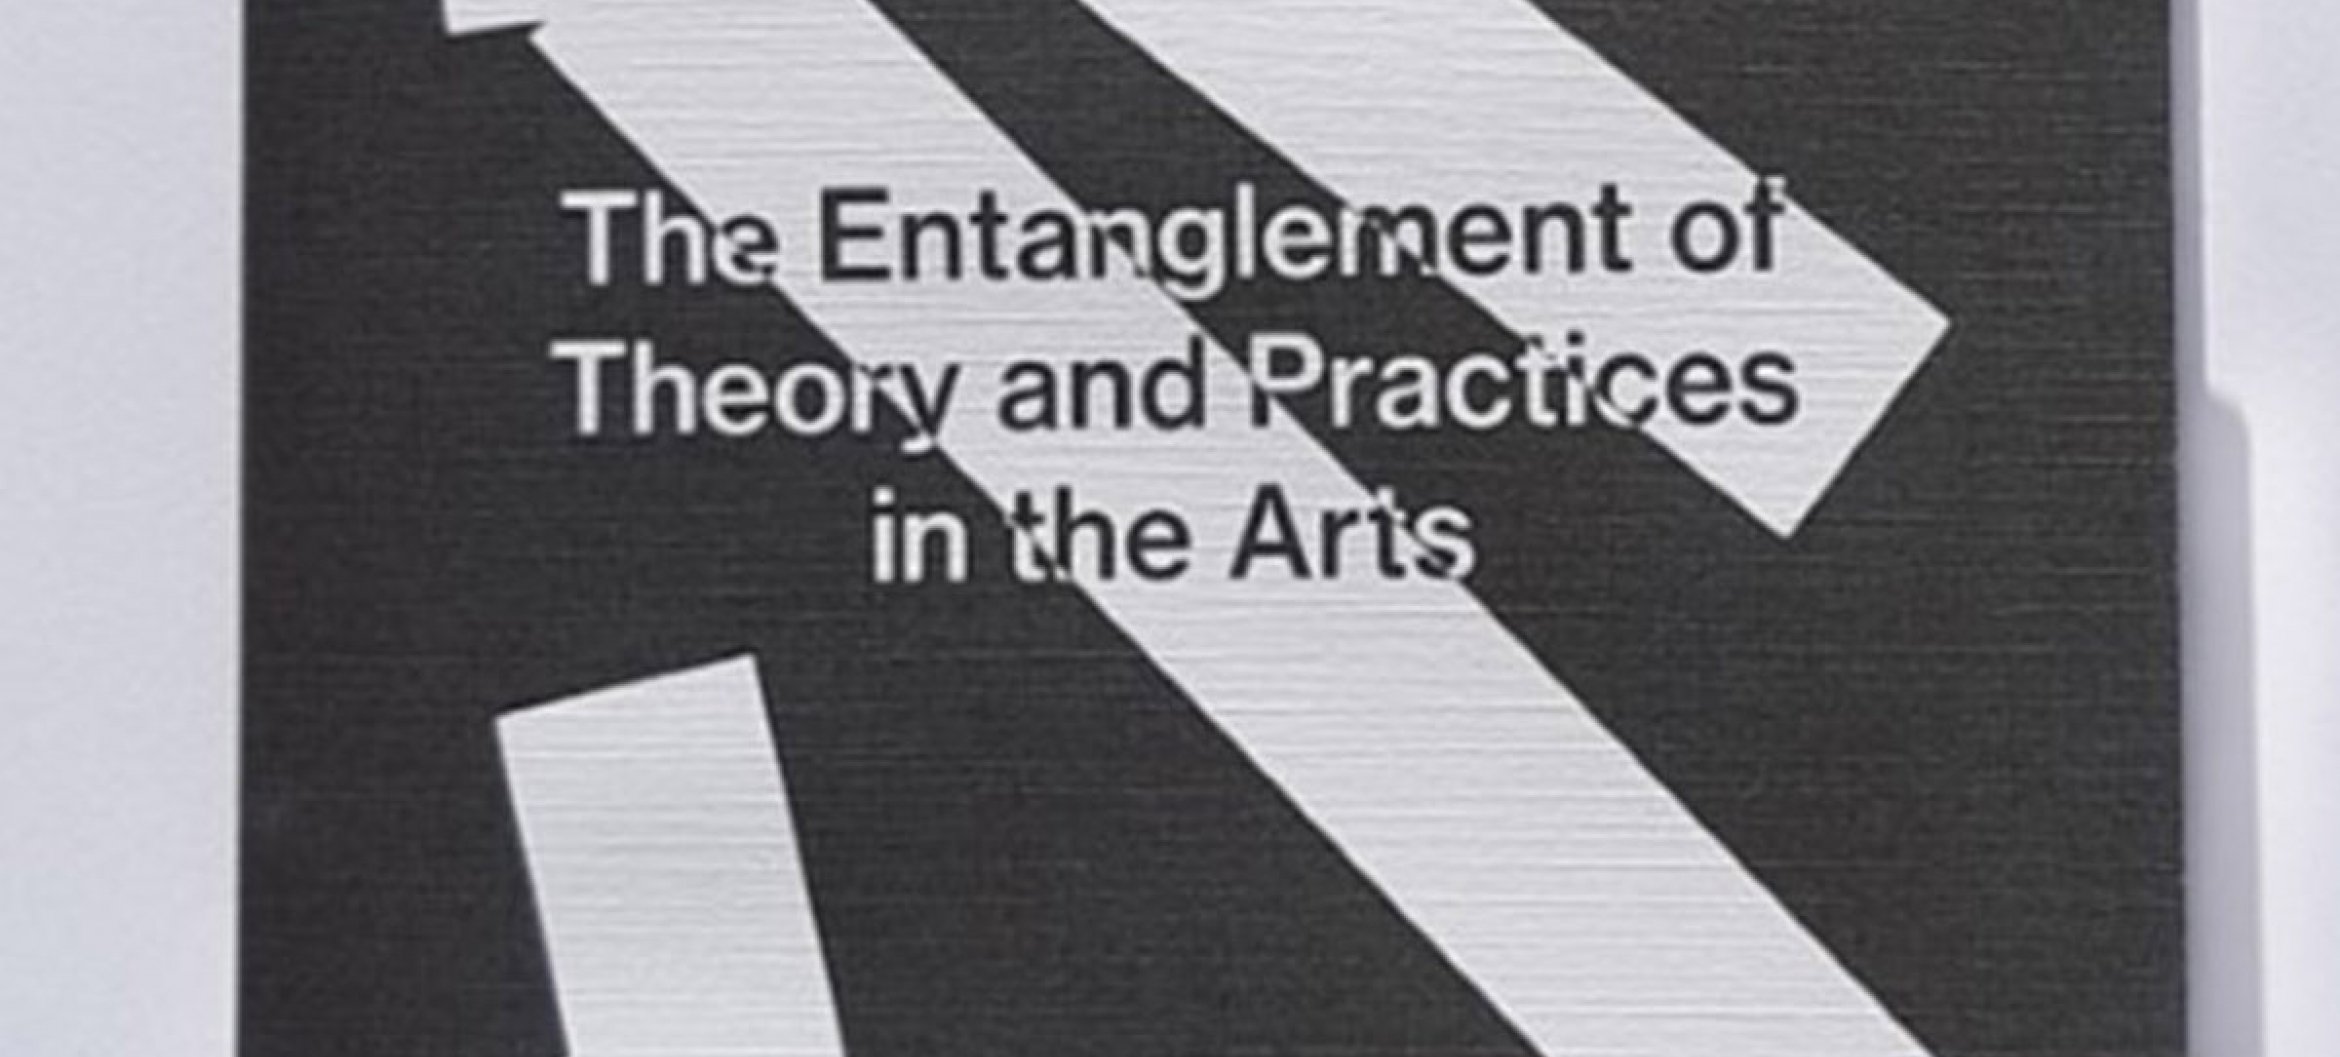 ArtEZ Press book release The Entanglement of Theory and Practices in the Arts